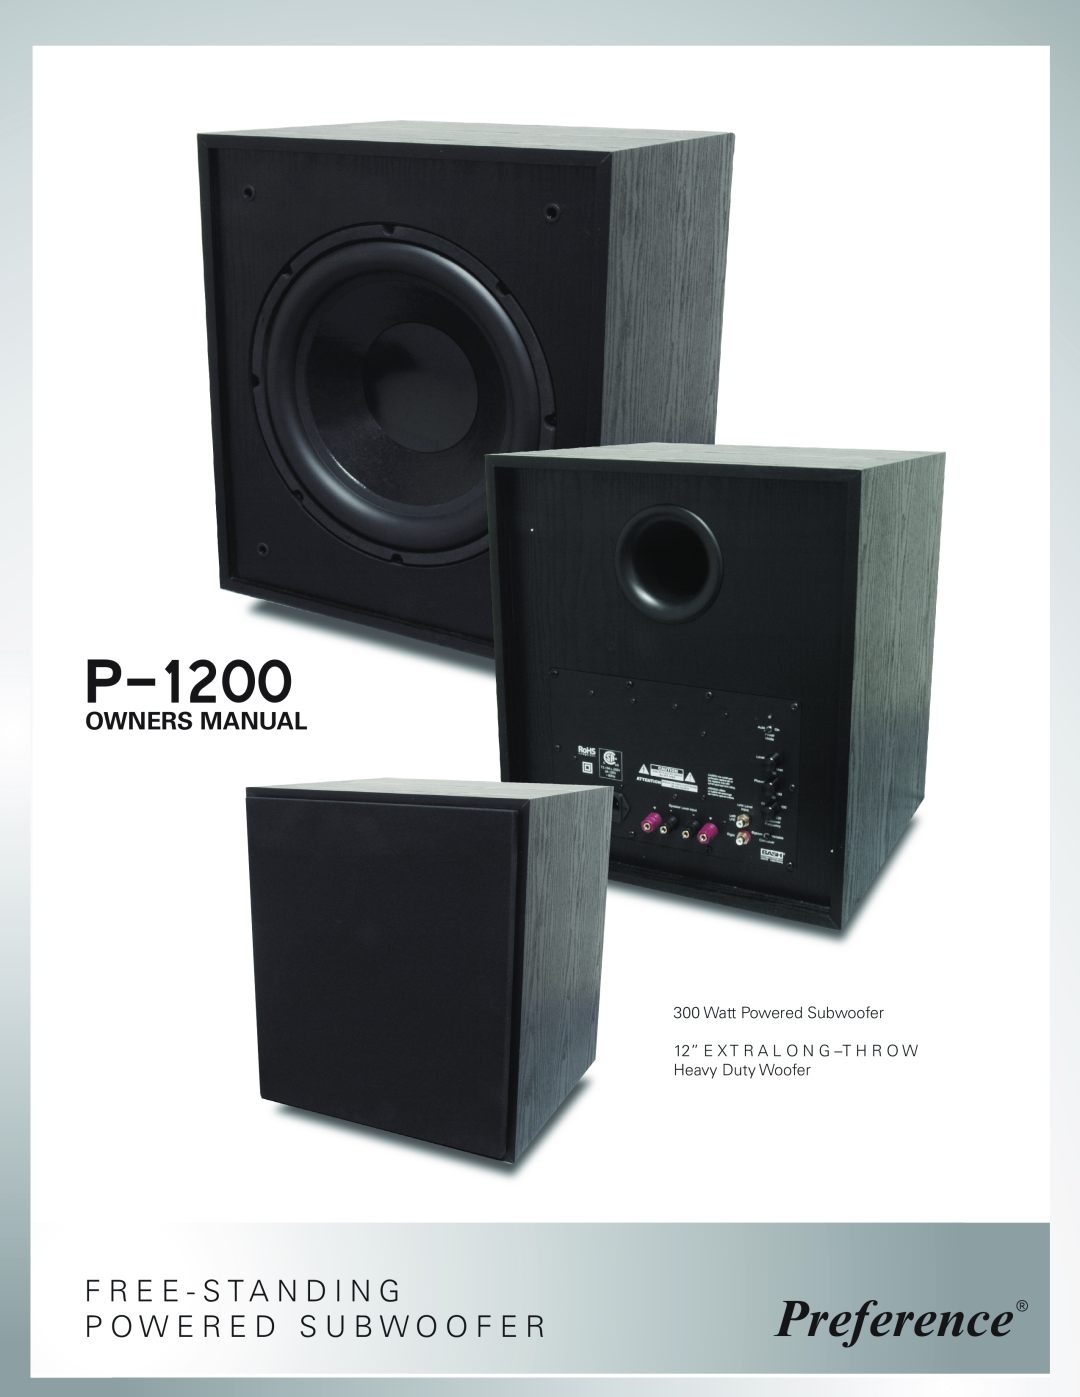 Preference Audio P-1200 owner manual Preference, F R E E - S T A N D I N G, P O W E R E D S U B W O O F E R 